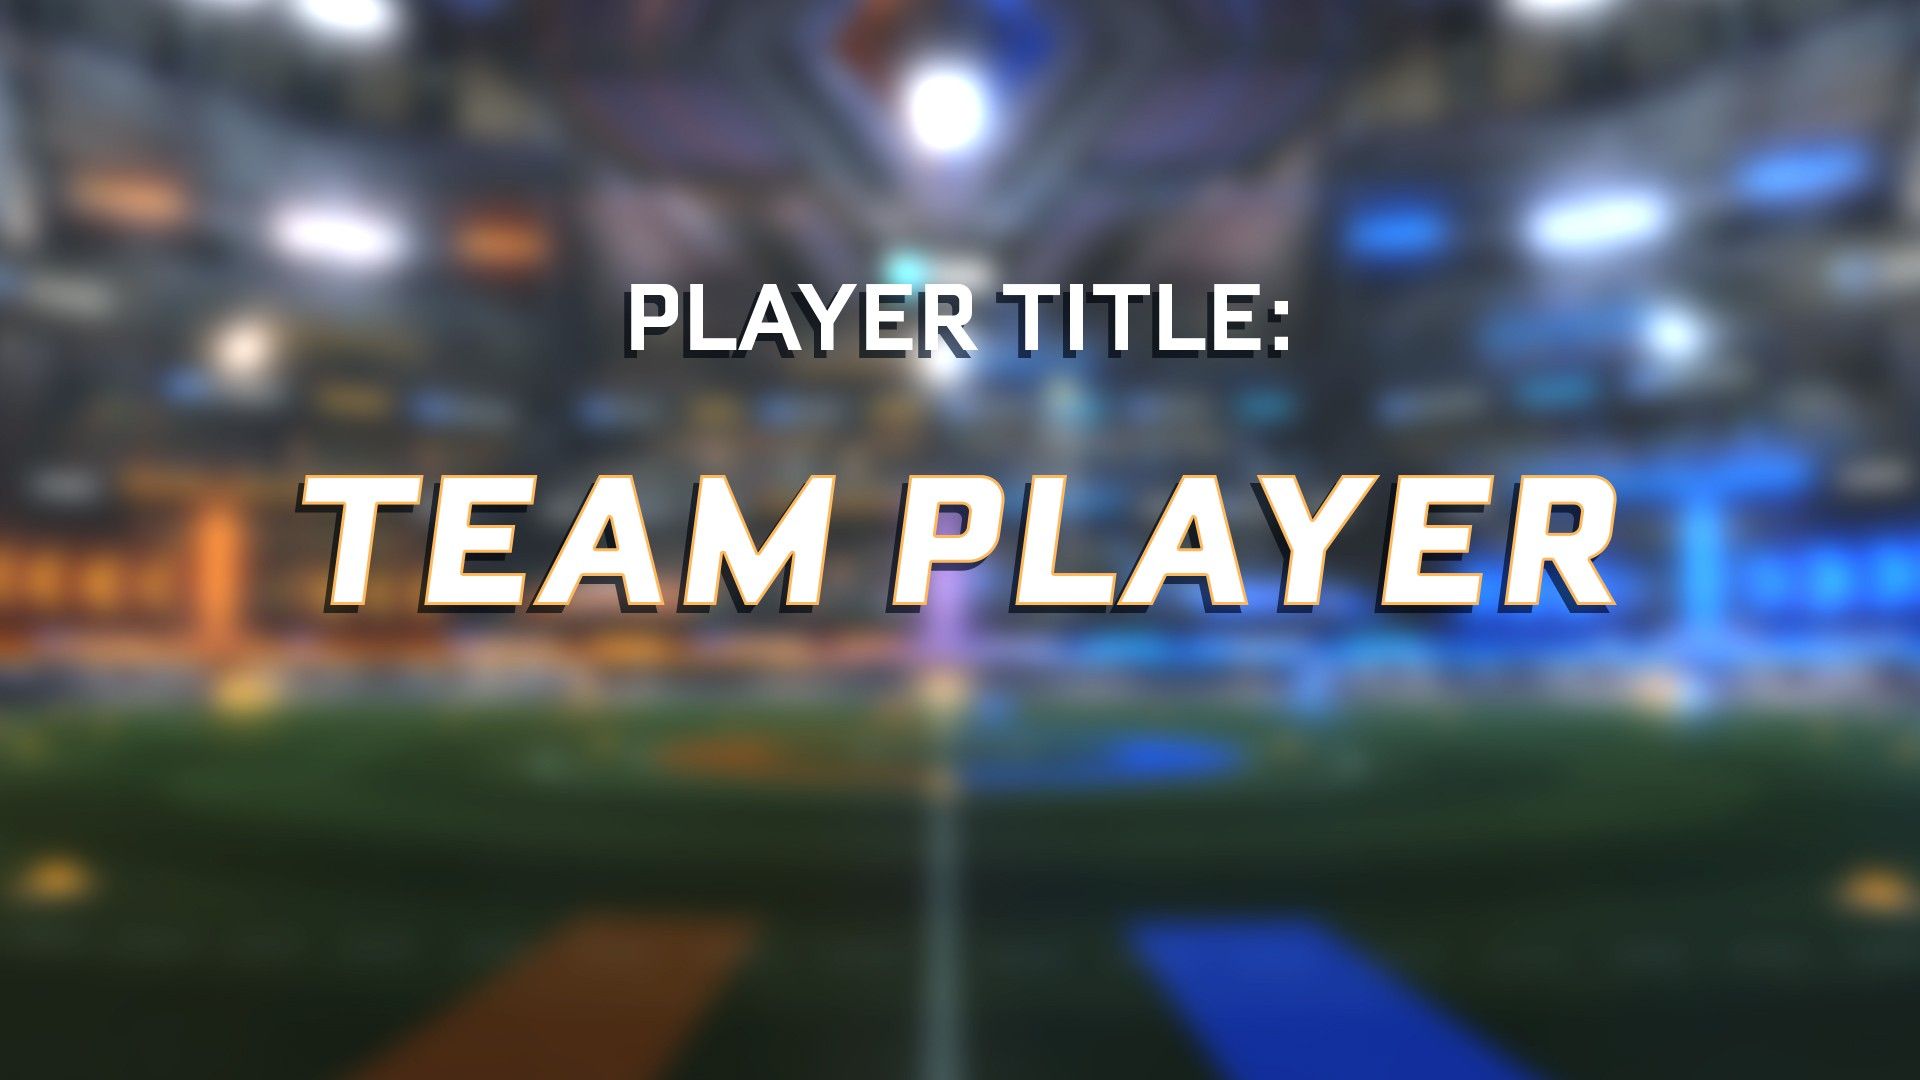 “Team Player” Player Title